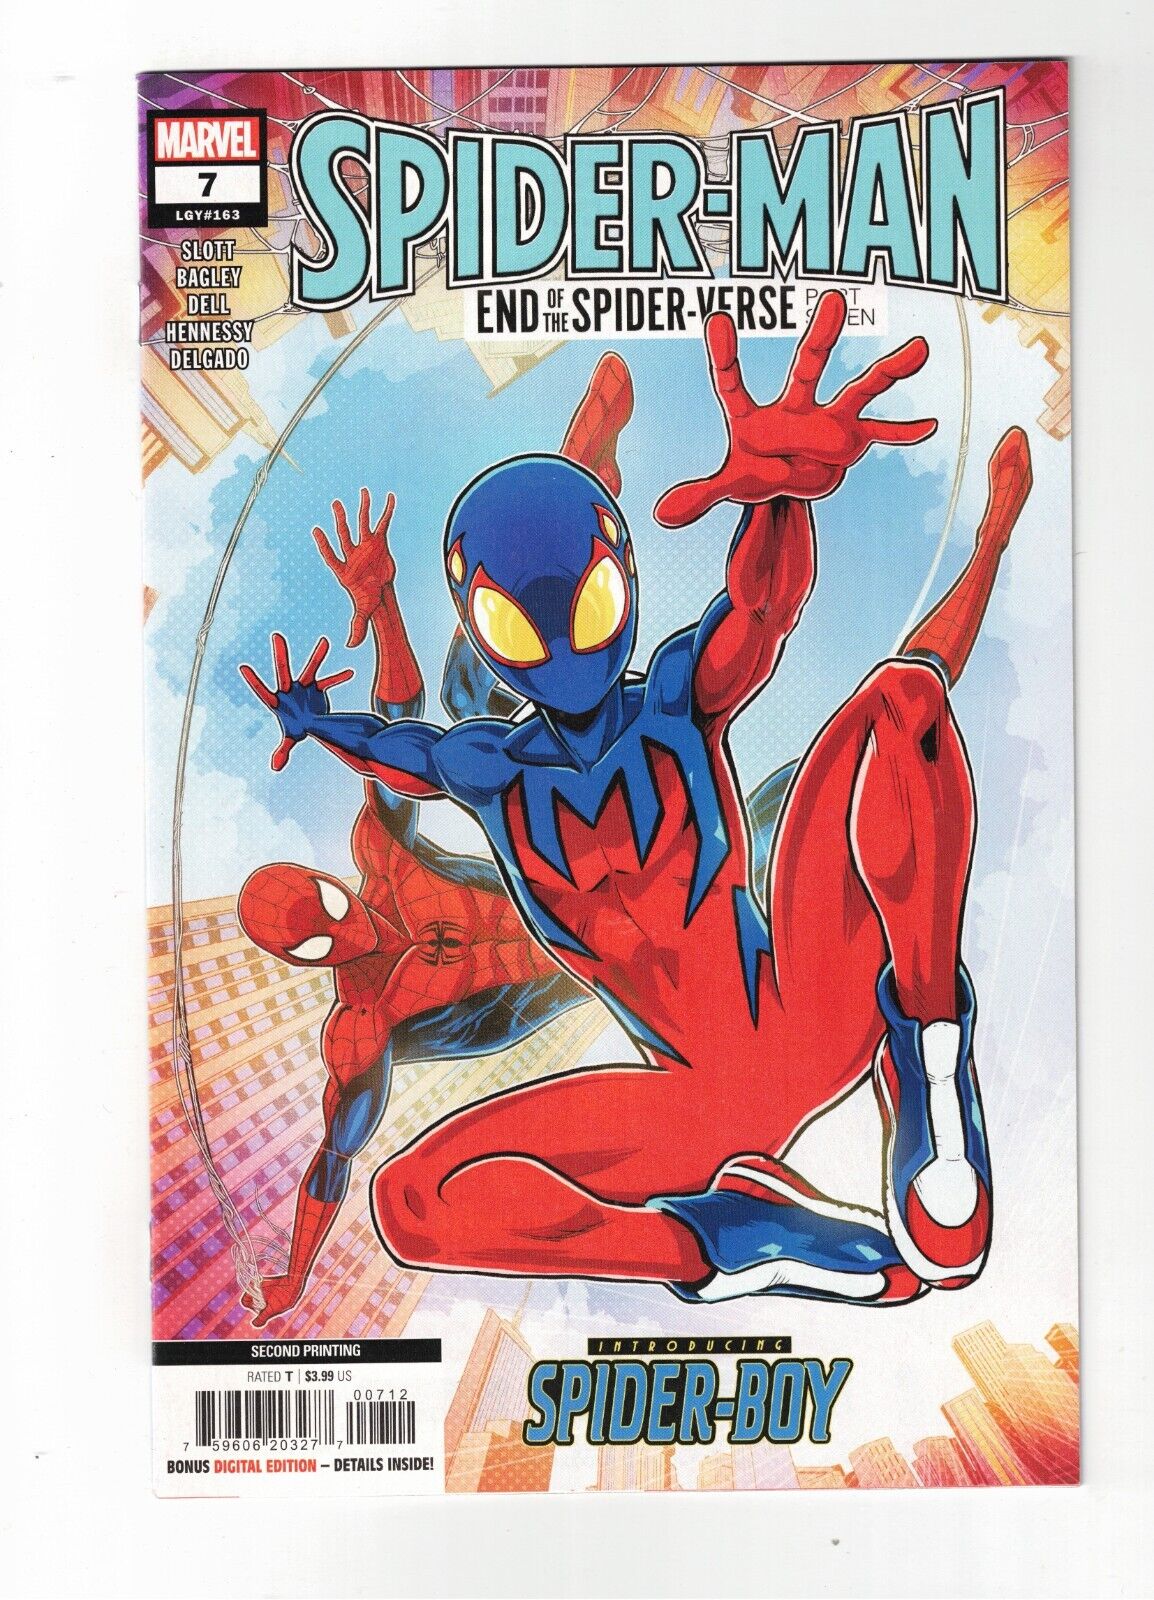 SPIDER-MAN #7 NM+ END OF THE SPIDER-VERSE SECOND PRINT